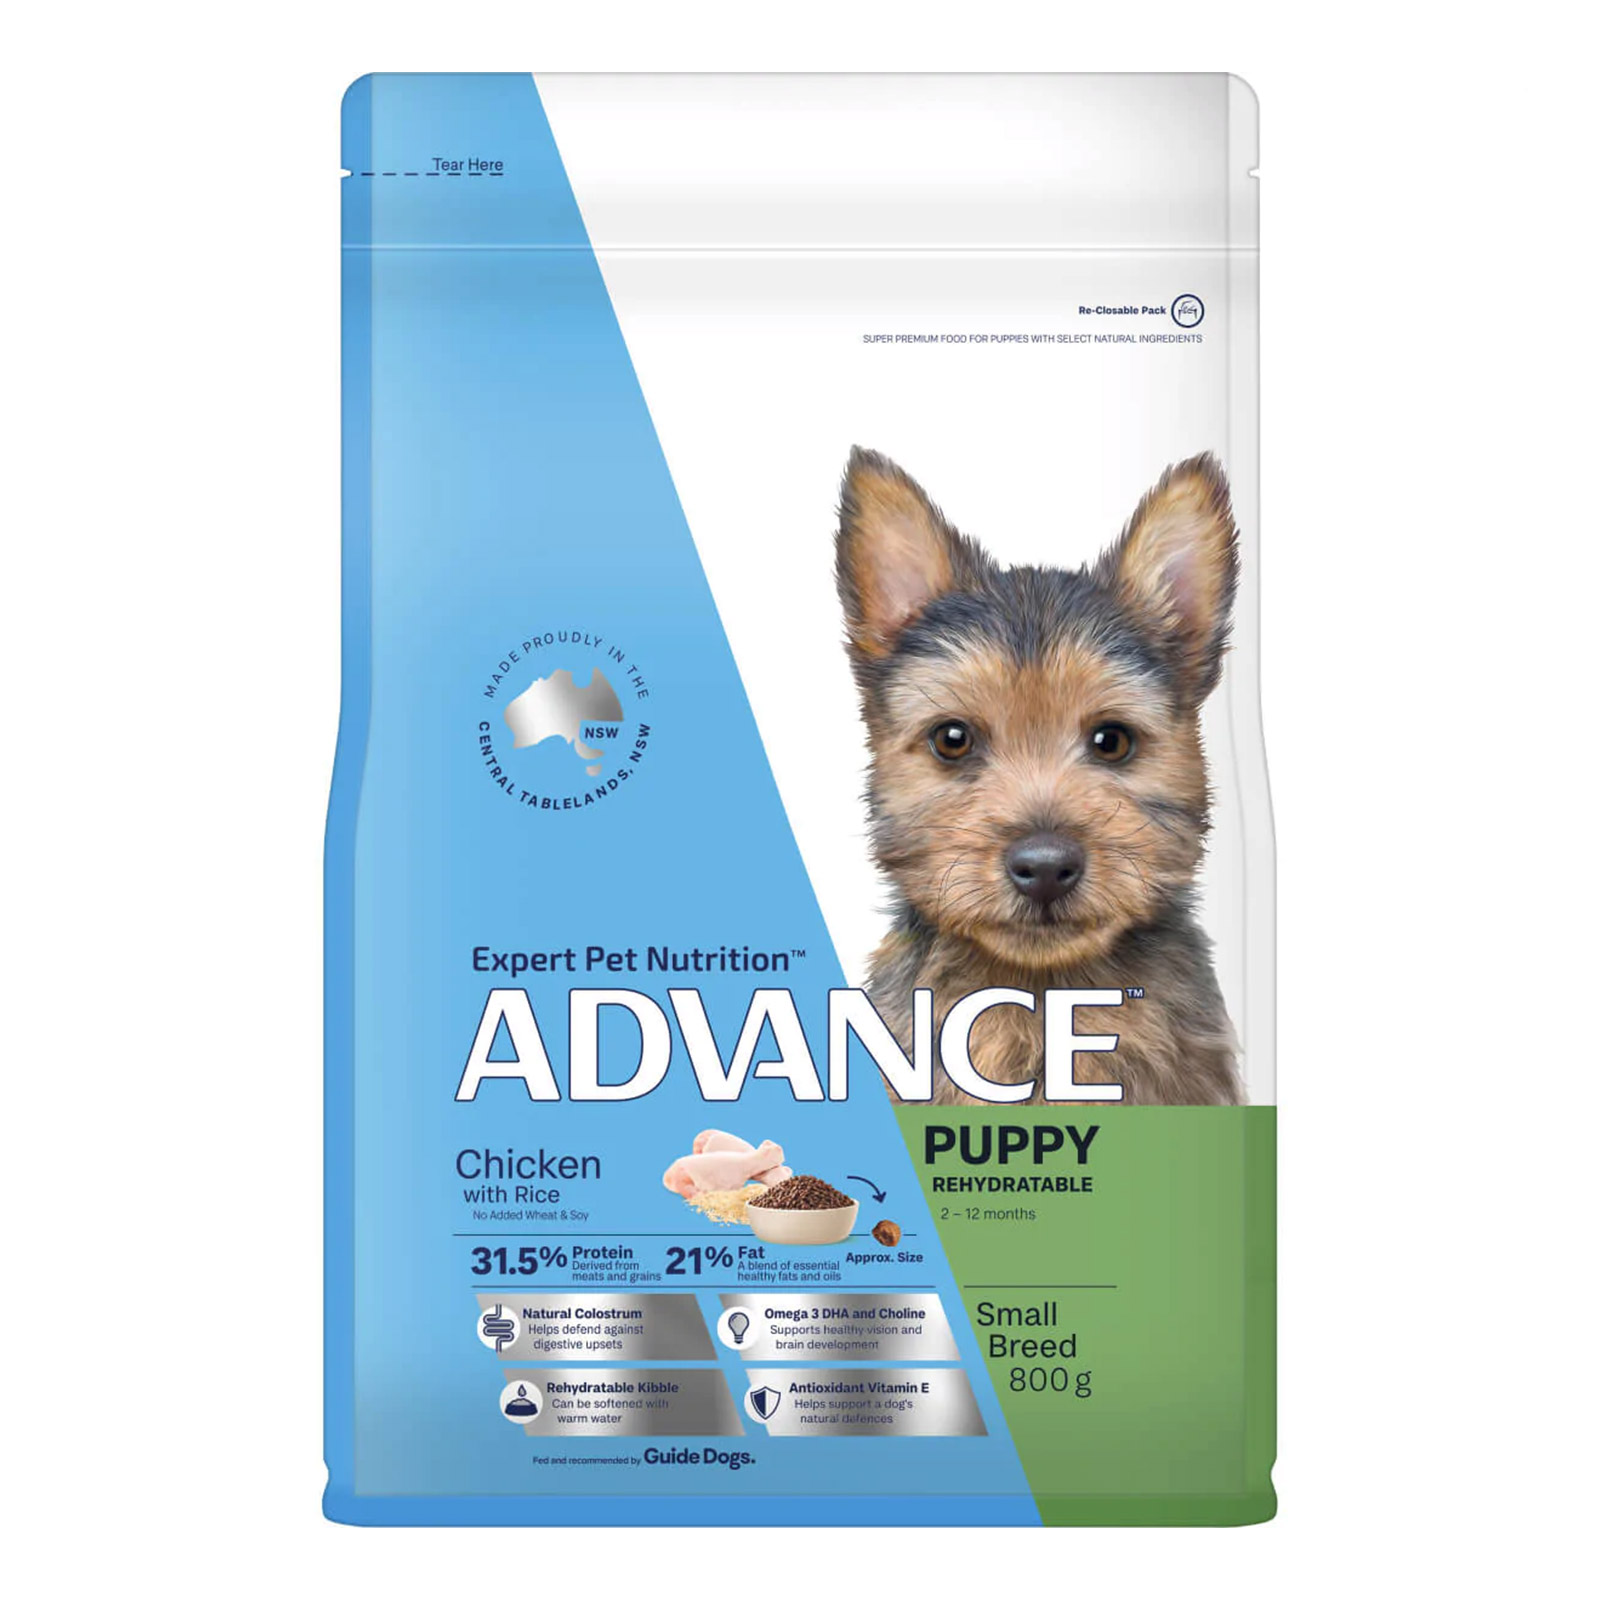 ADVANCE Puppy Rehydratable Small Breed - Chicken with Rice